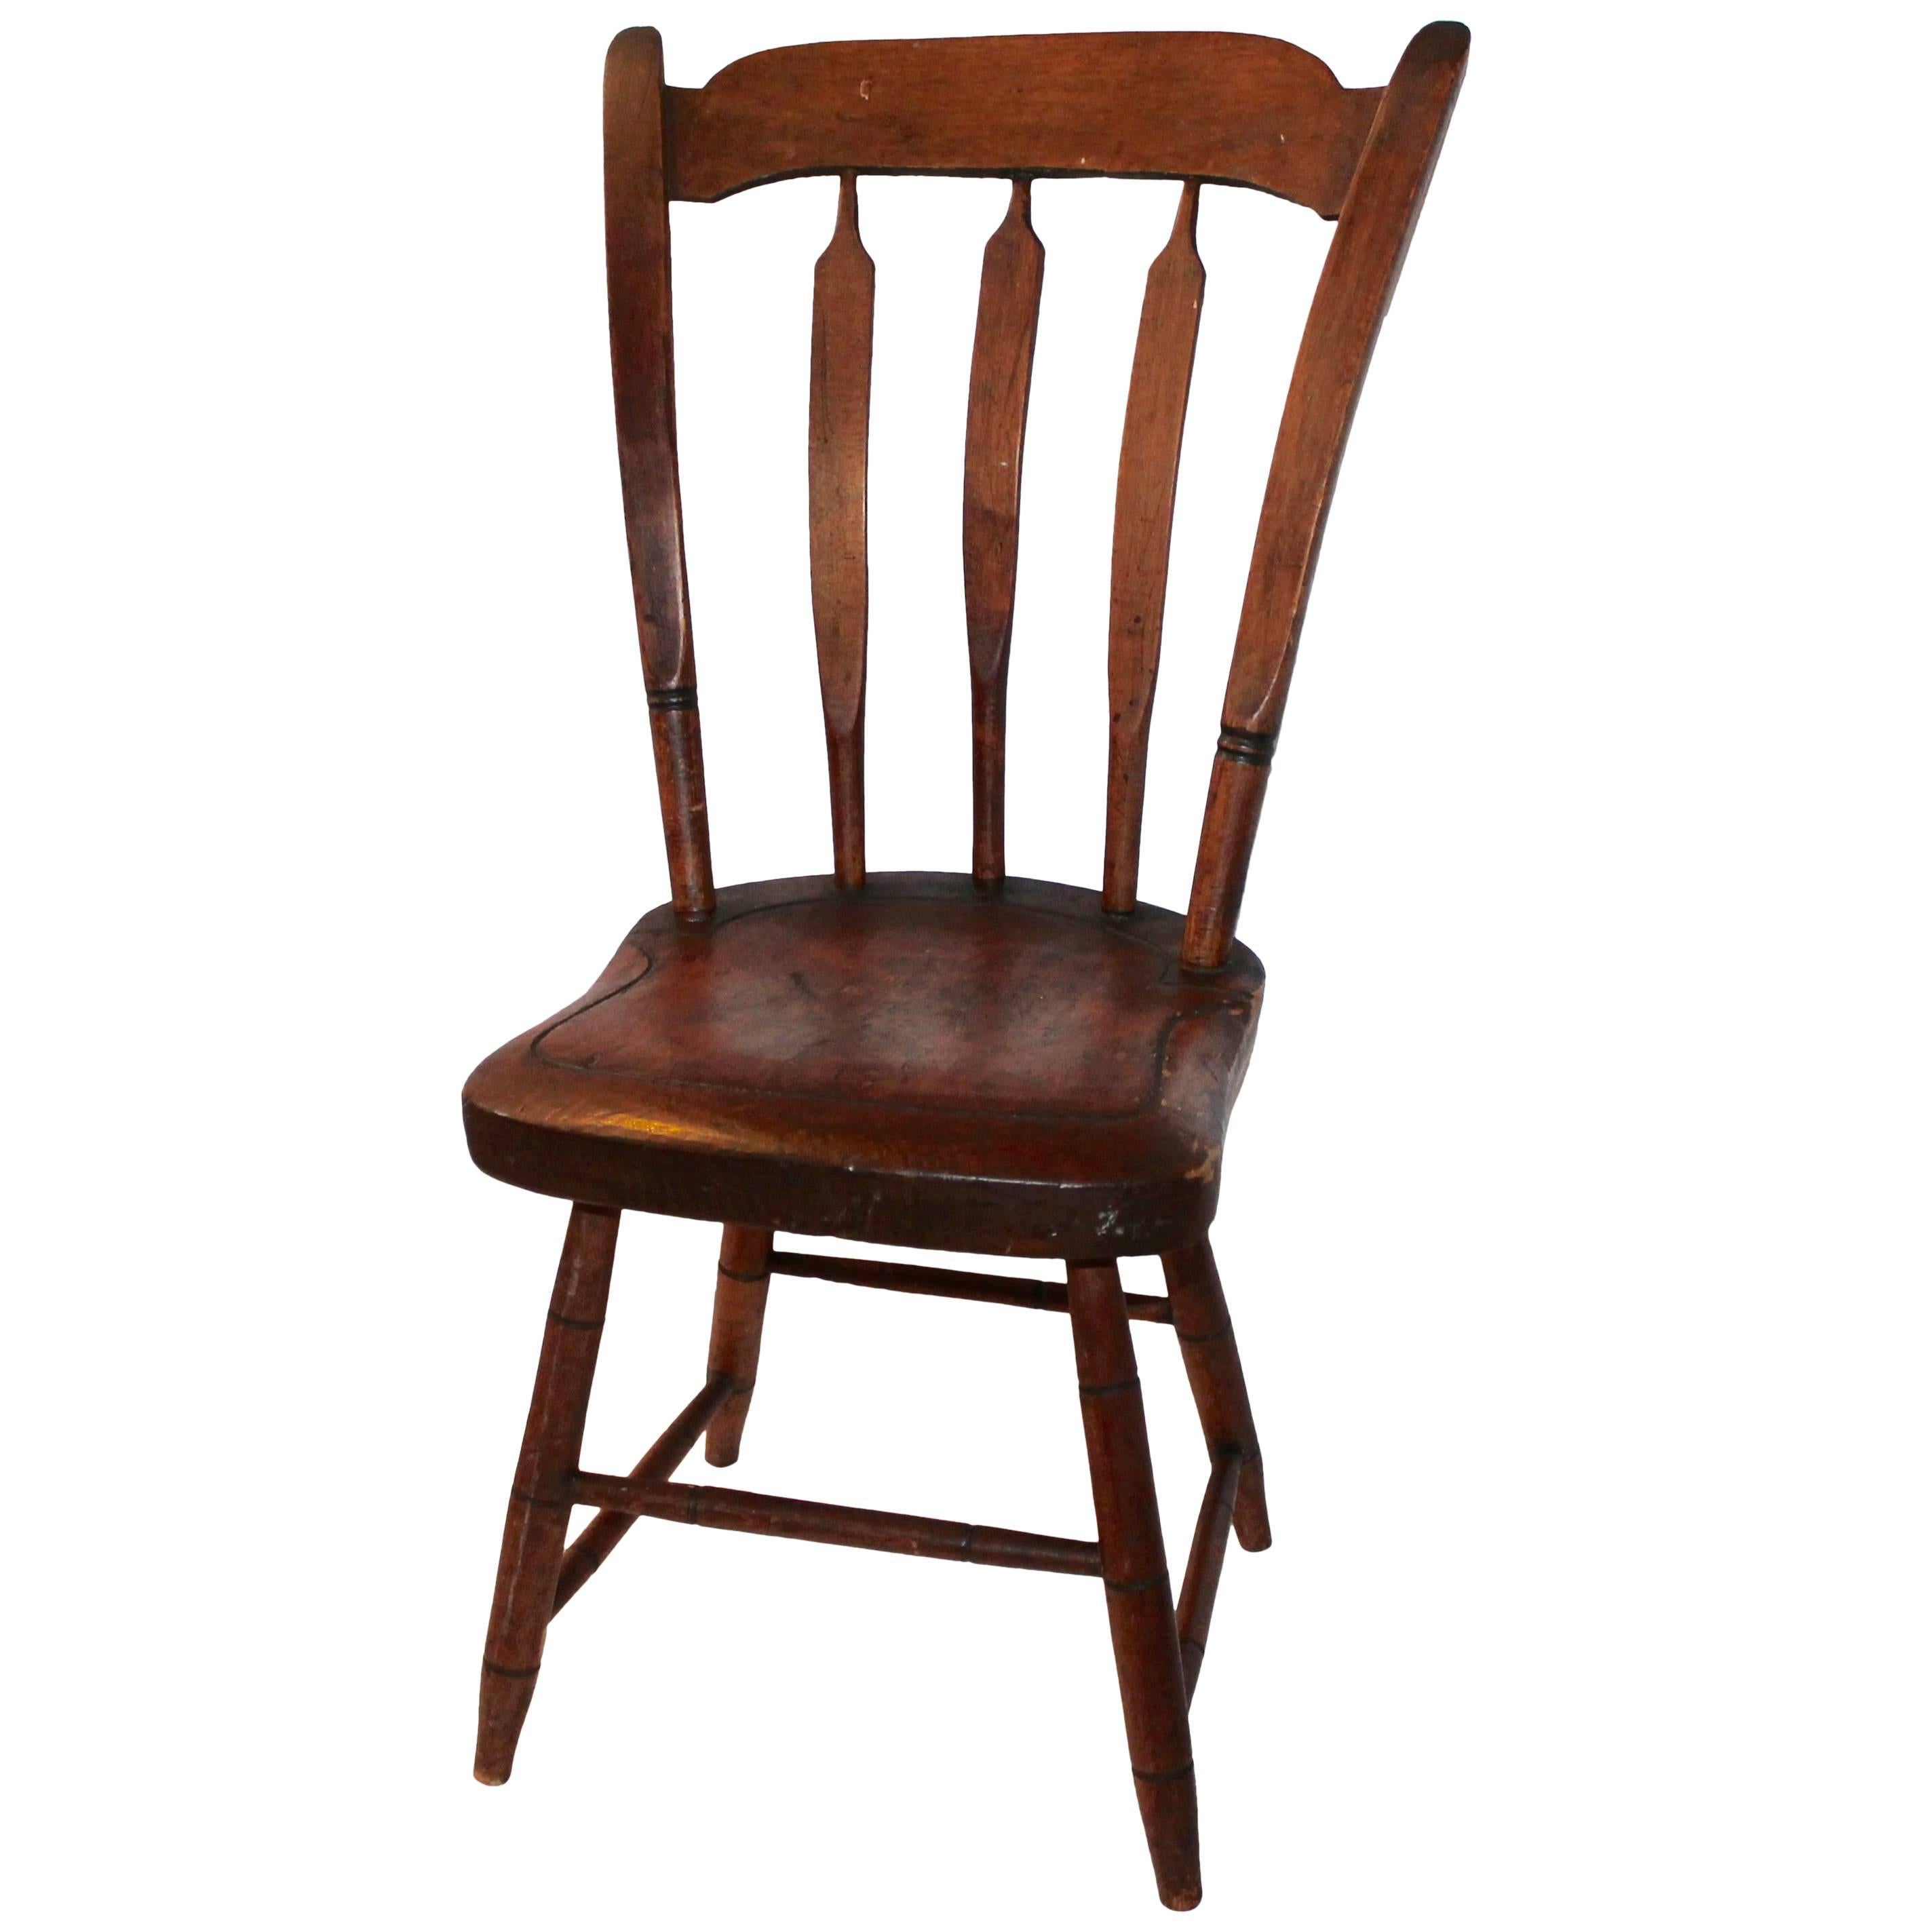 Amazing Early 19th Century Child's Thumbtack/Arrowback Windsor Chair For Sale